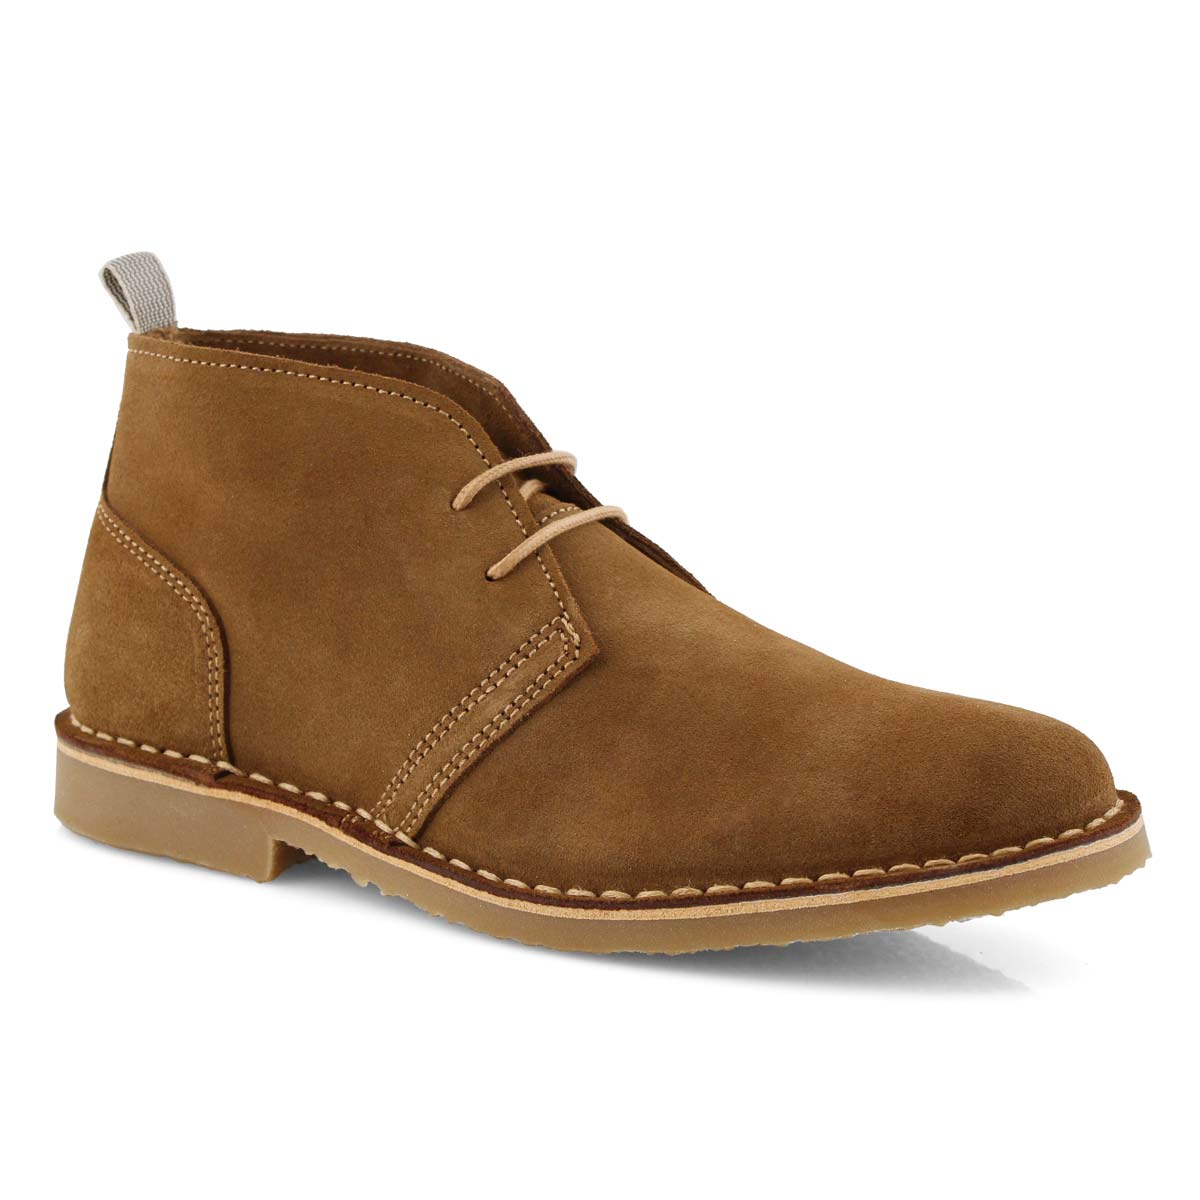 women's lace up chukka boots